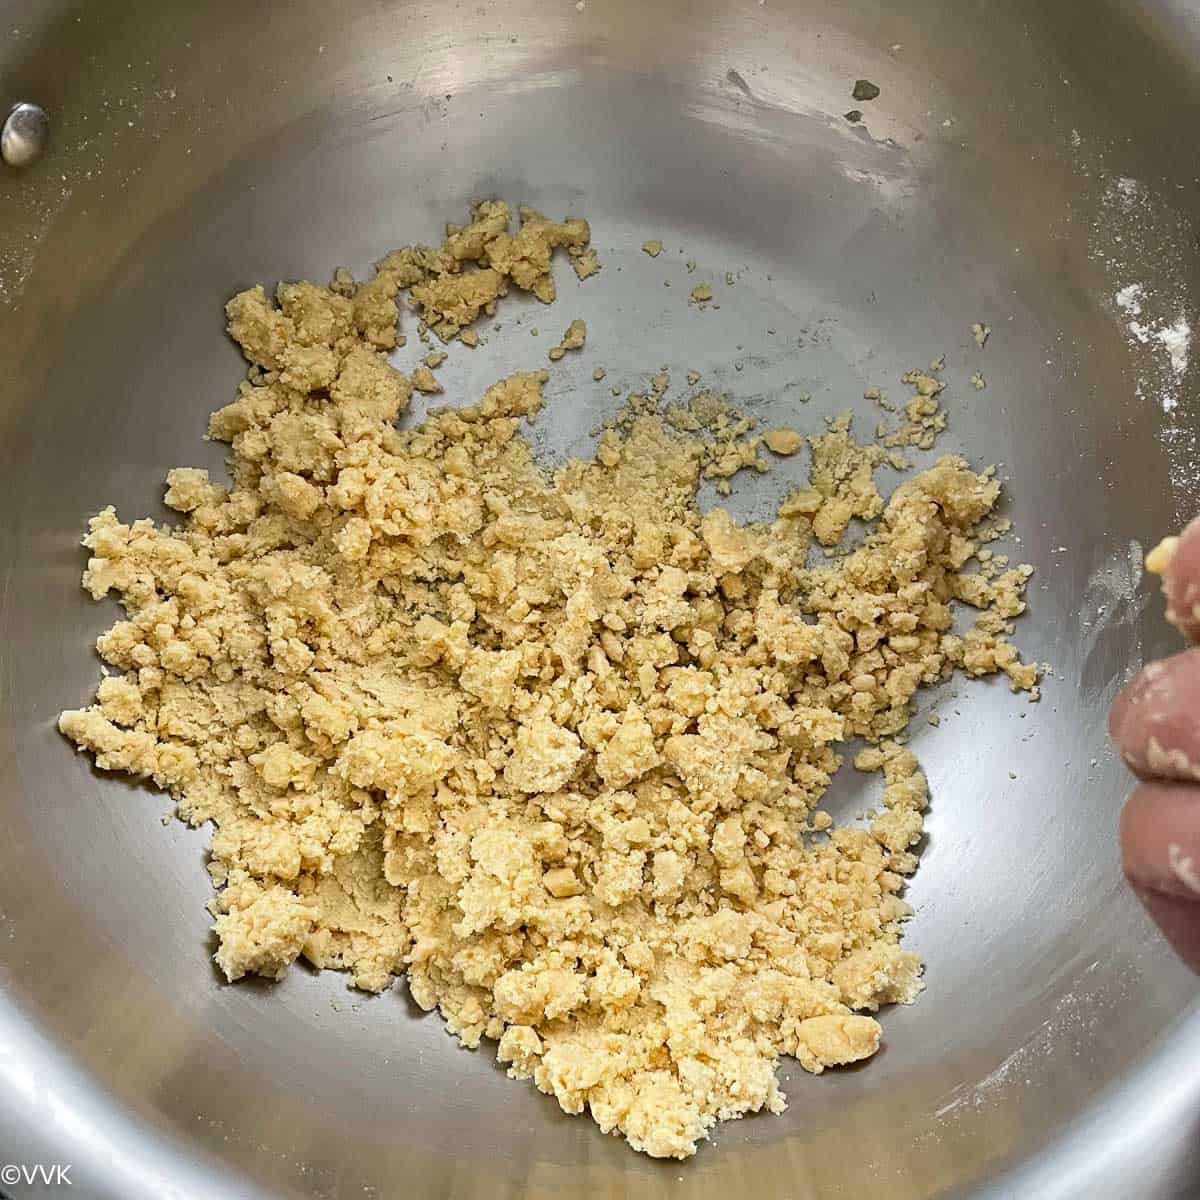 ladoo mix after adding ghee